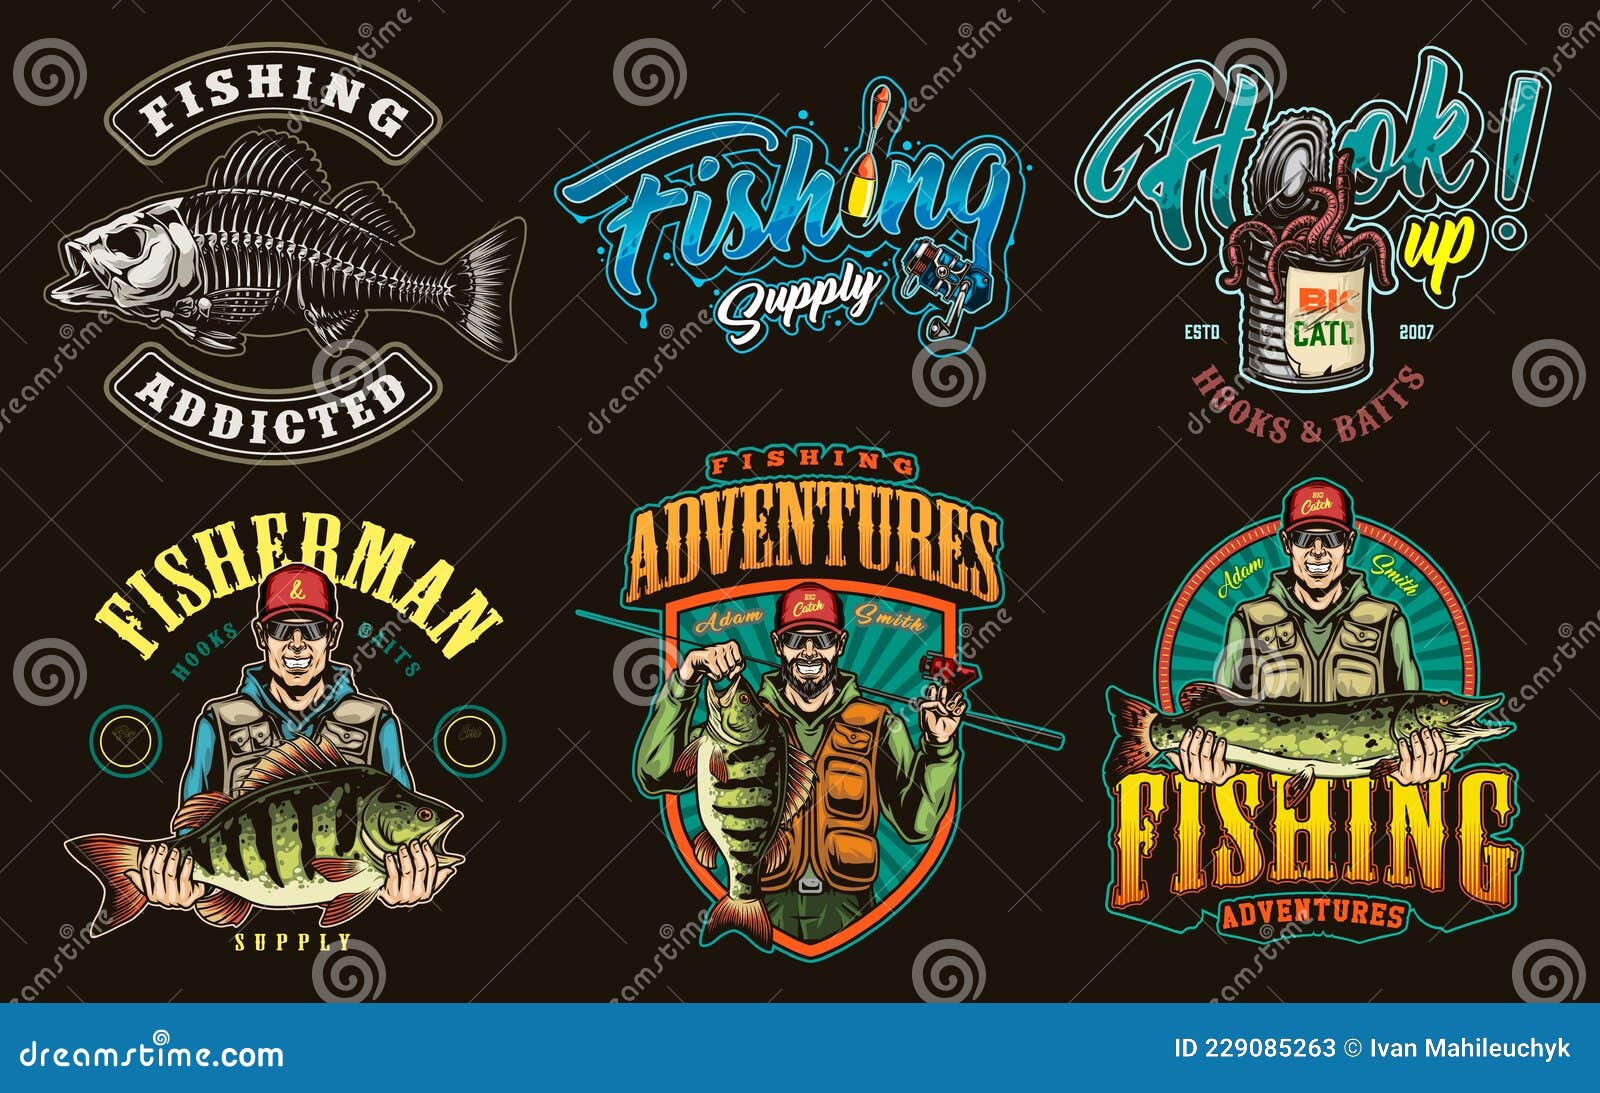 Colorful Vintage Fishing Prints Stock Vector - Illustration of people,  animal: 229085263